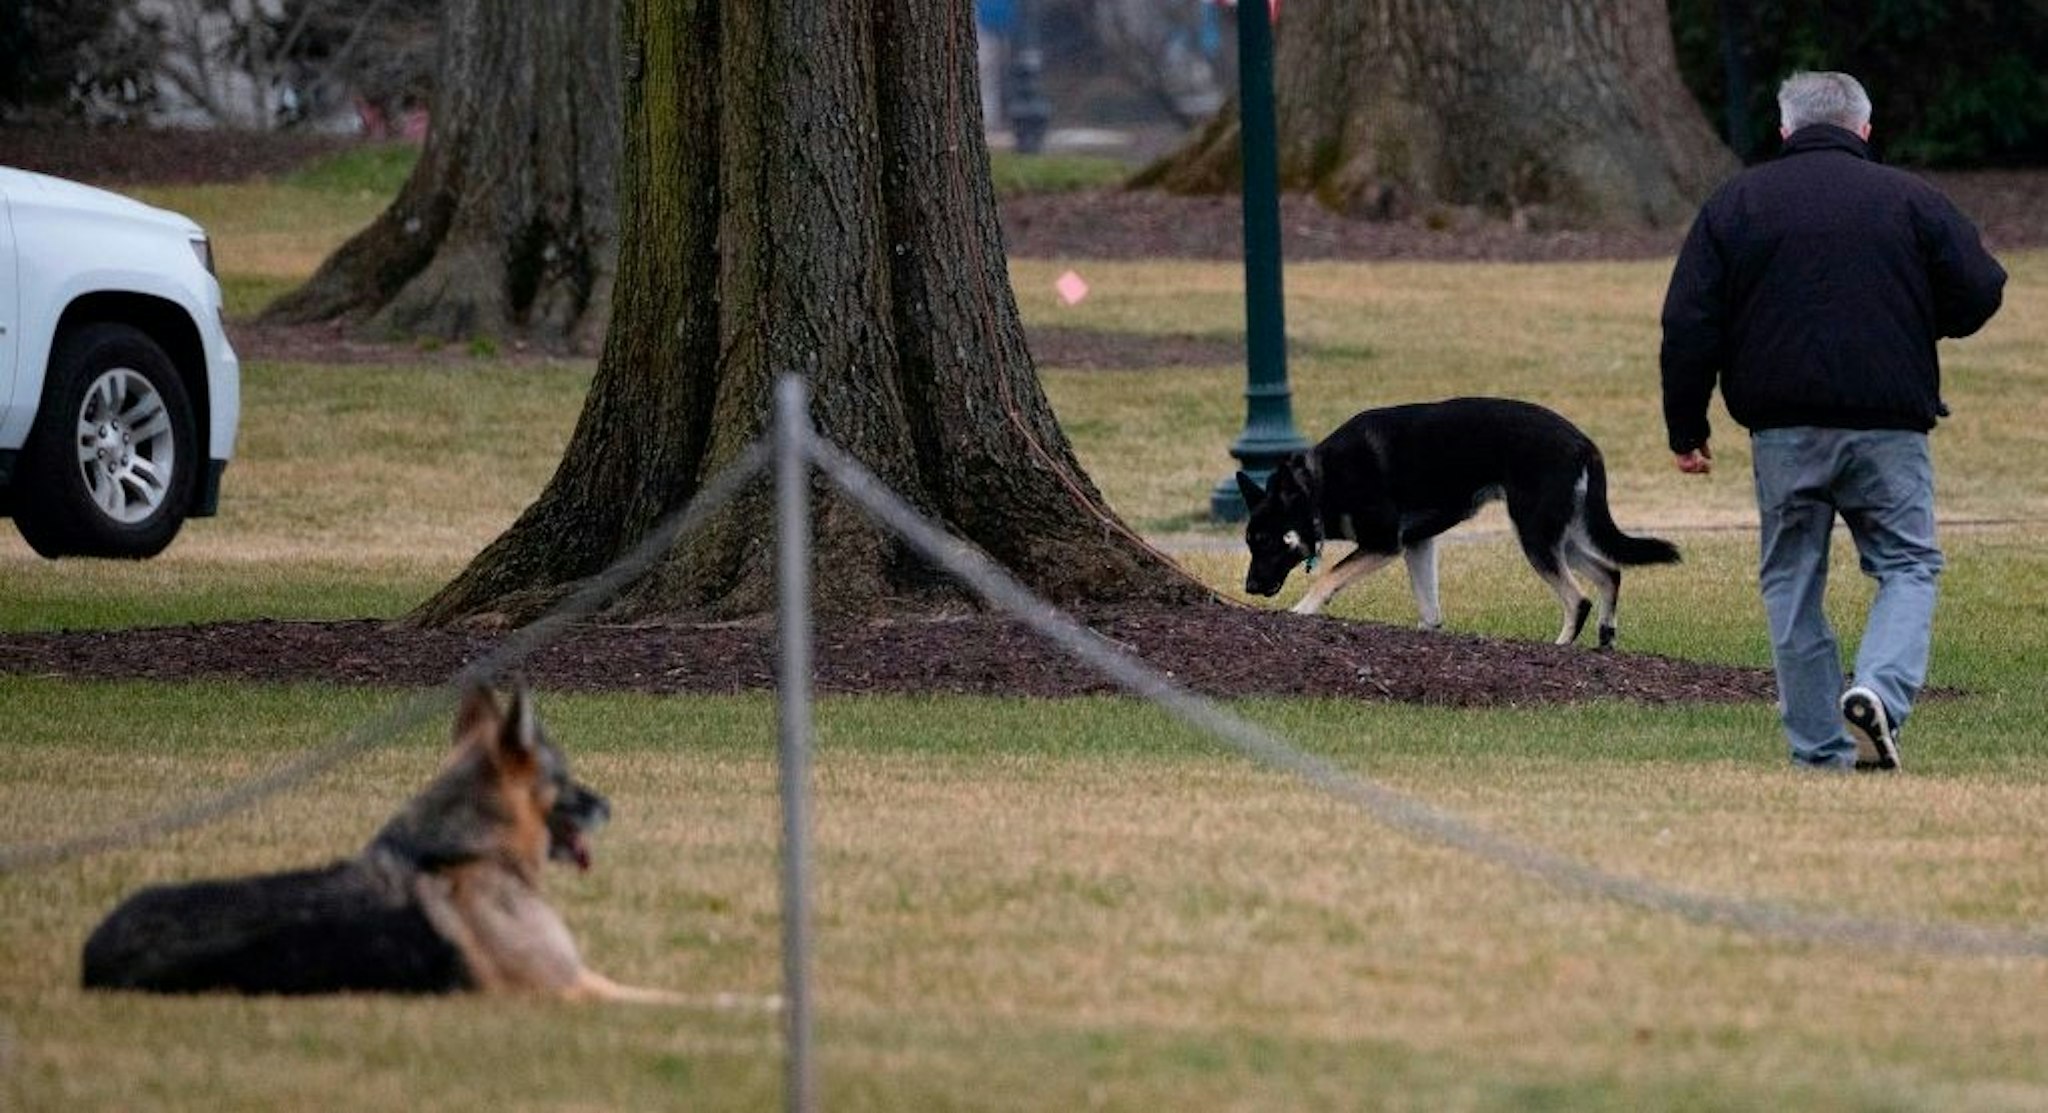 First dogs Champ and Major Biden are seen on the South Lawn of the White House in Washington, DC, on January 25, 2021. - Joe Biden's dogs Champ and Major have moved into the White House, reviving a long-standing tradition of presidential pets that was broken under Donald Trump. The pooches can be seen trotting on the White House grounds in pictures retweeted by First Lady Jill Biden's spokesman Michael LaRosa, with the pointed obelisk of the Washington Monument in the background."Champ is enjoying his new dog bed by the fireplace, and Major loved running around on the South Lawn," LaRosa told CNN in a statement on January 25, 2021. (Photo by JIM WATSON / AFP) (Photo by